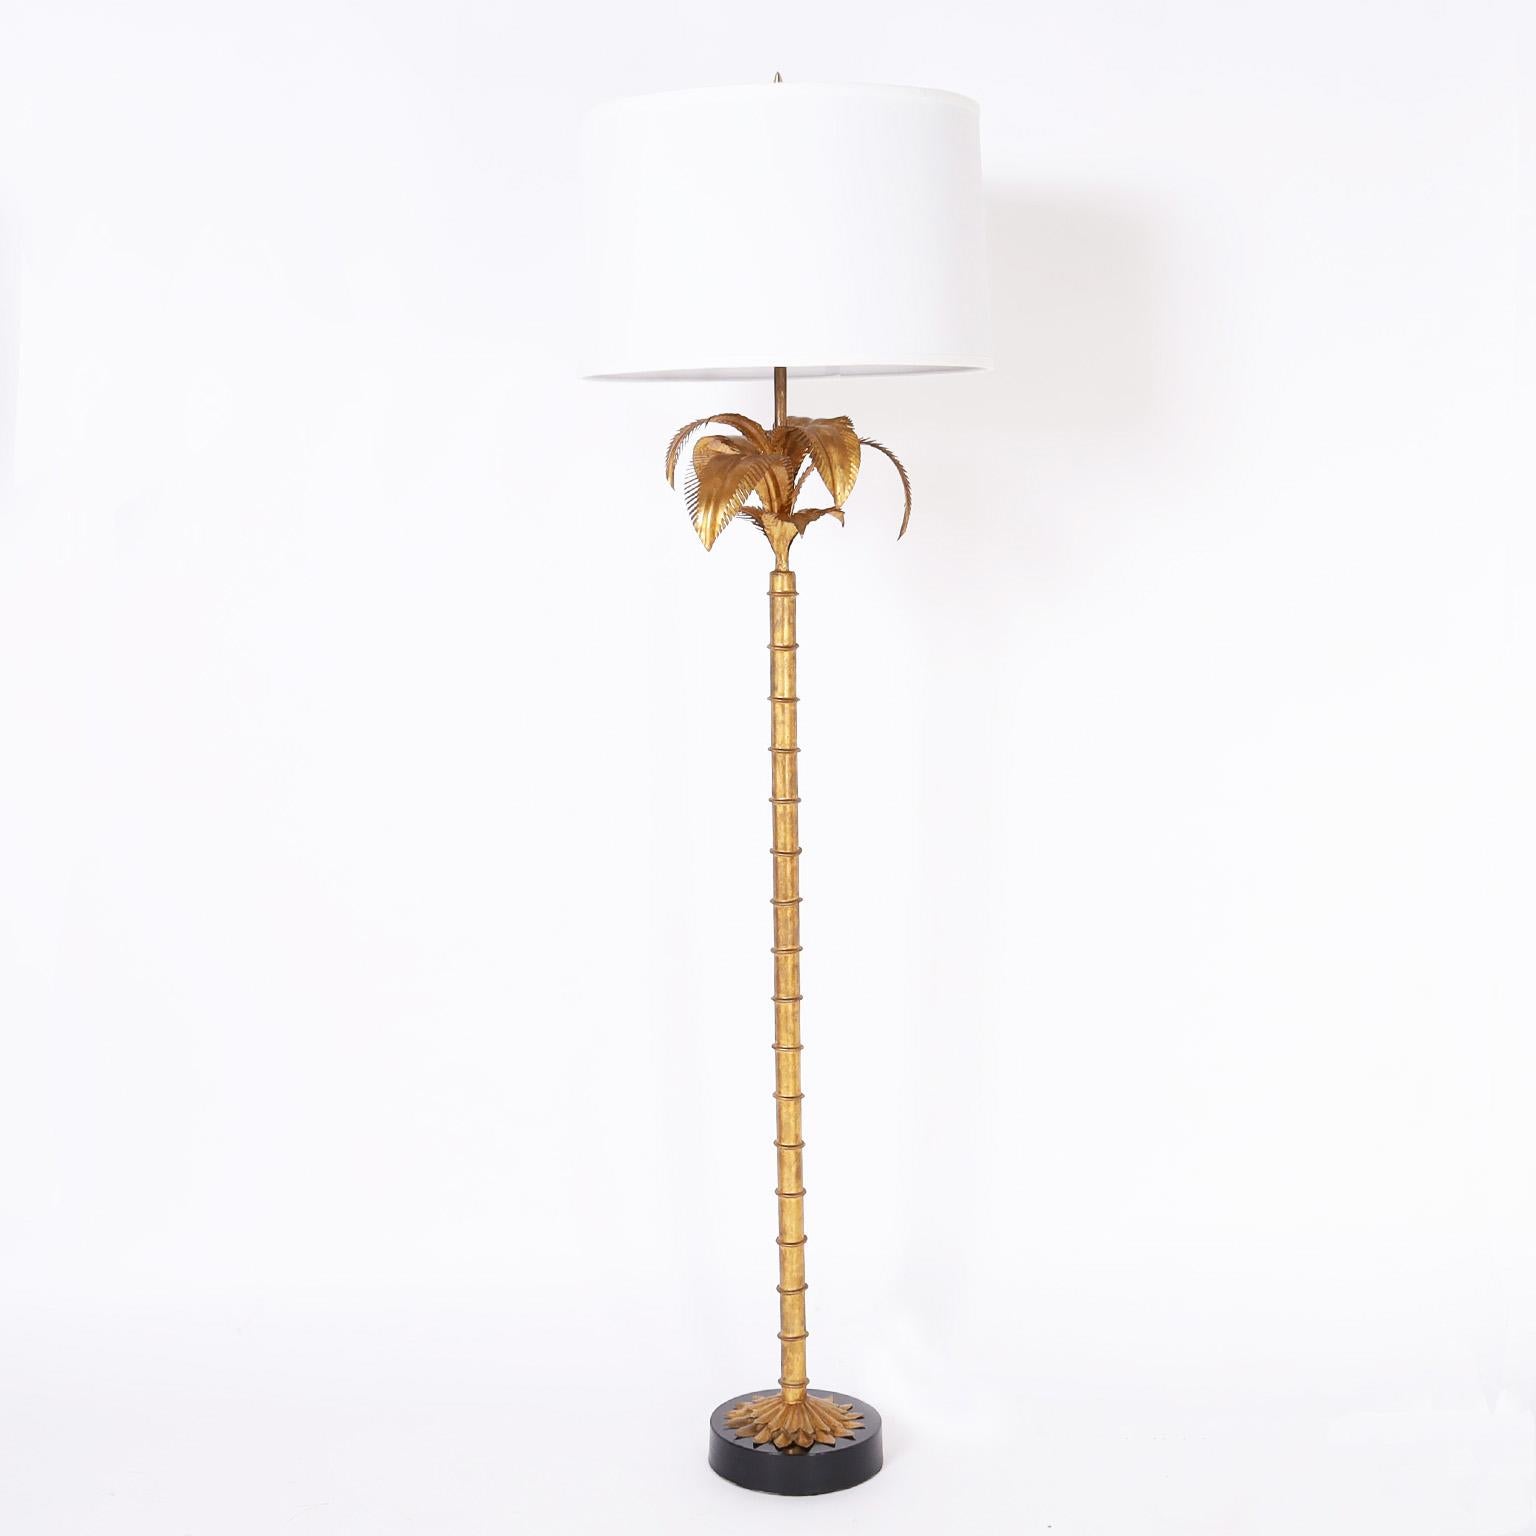 Chic pair of vintage Italian floor lamps crafted in gilt metal in a stylized palm tree form on black lacquer metal bases.